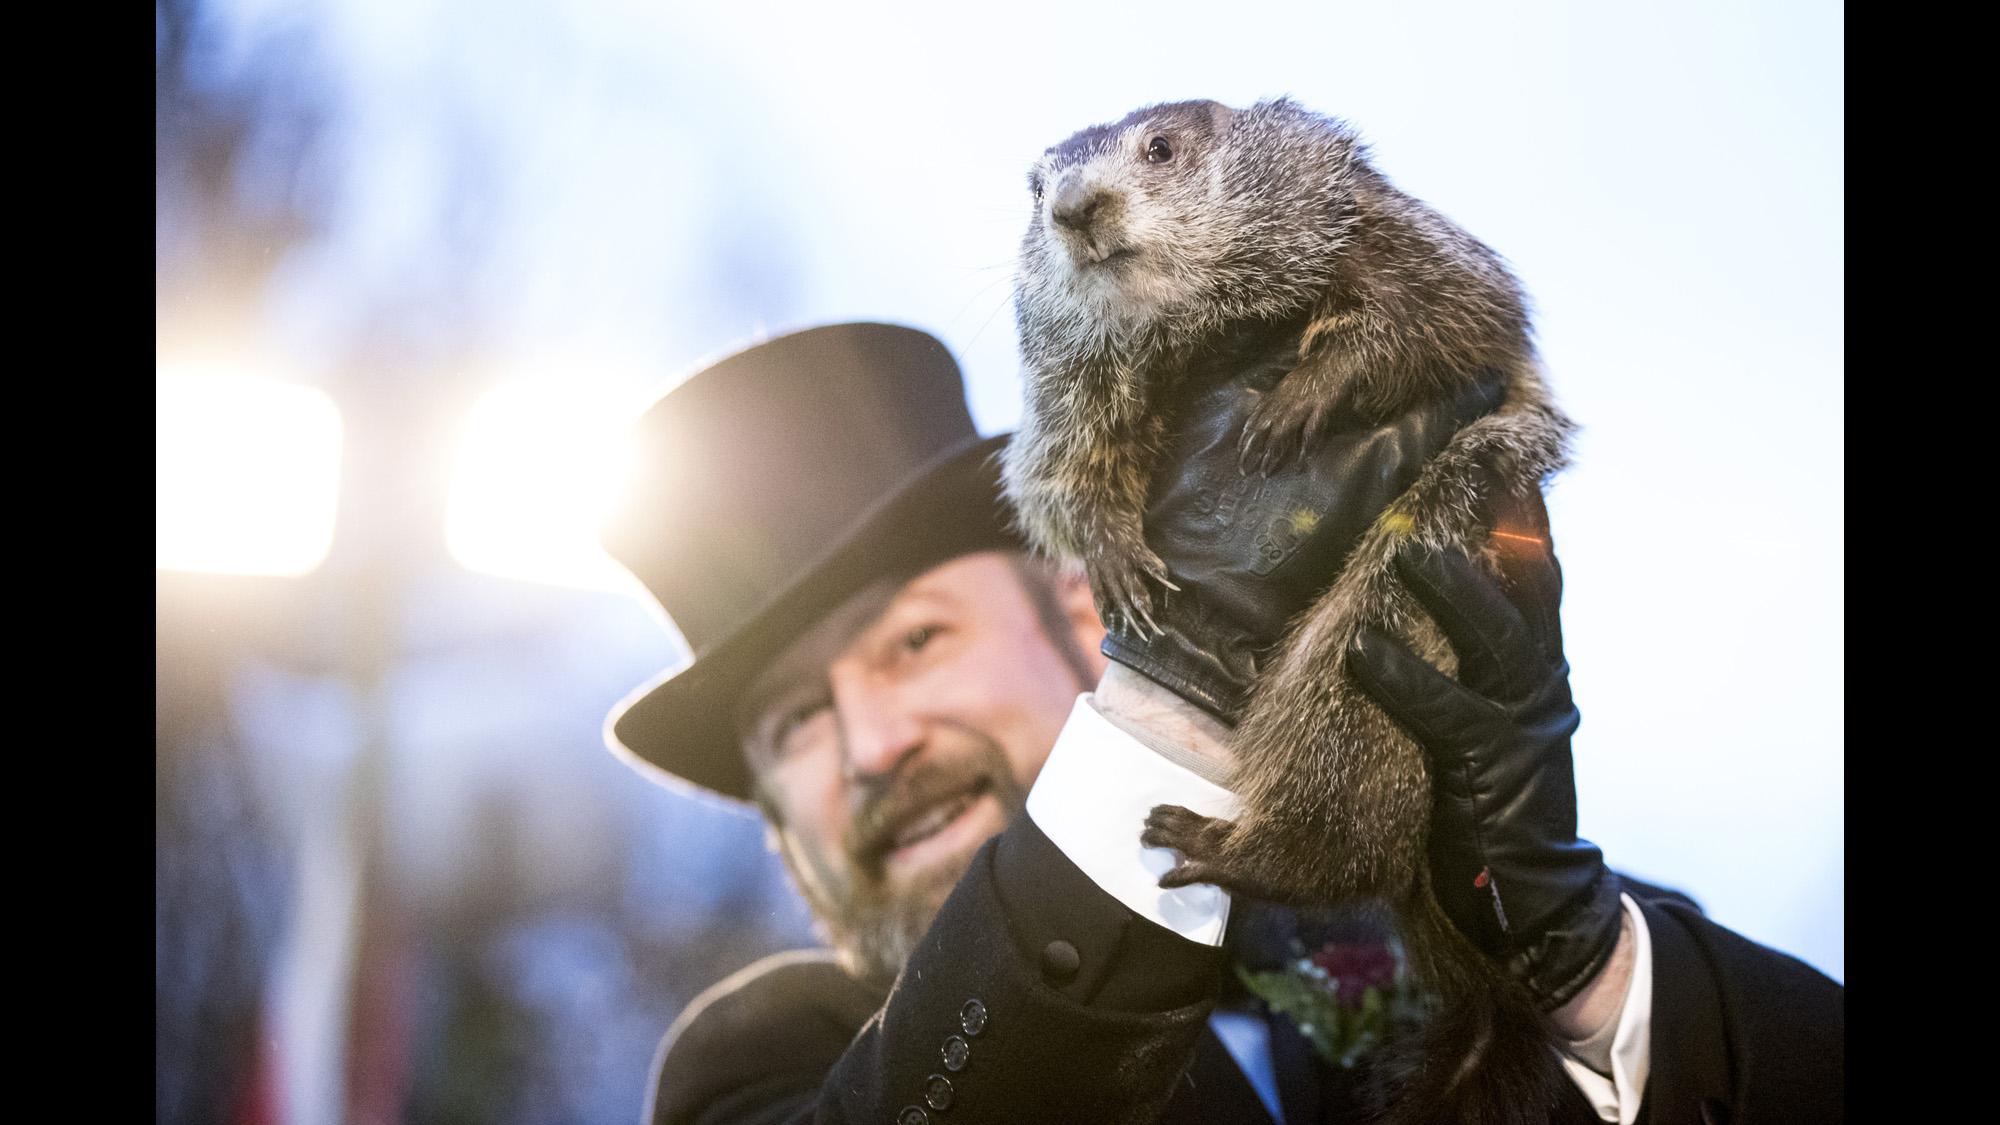 Why does Groundhog Day exist?